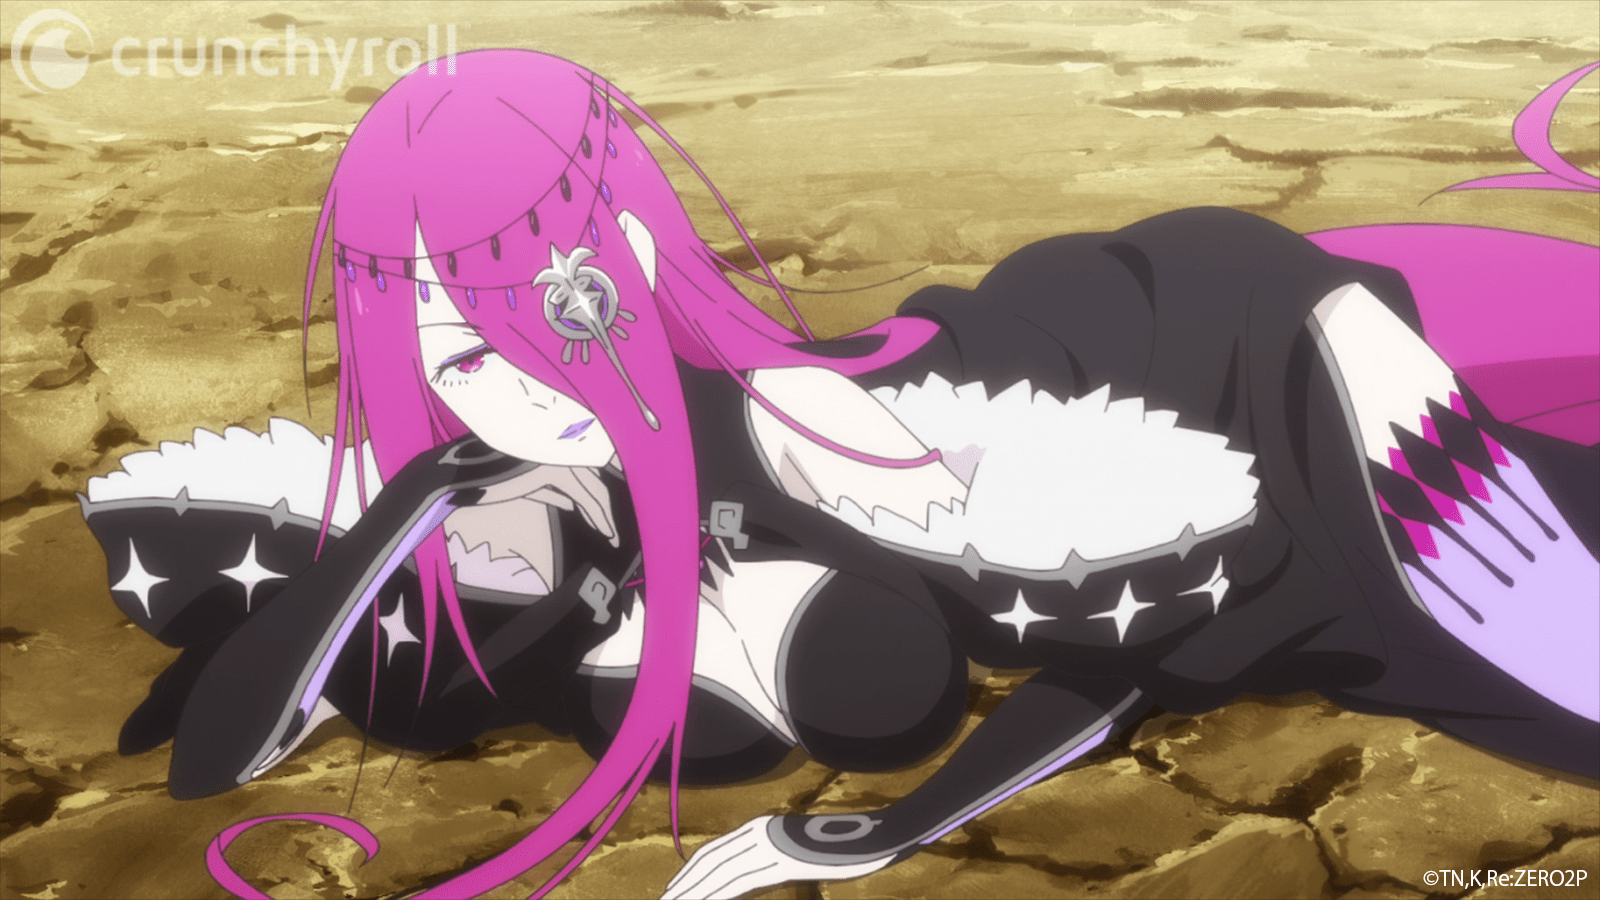 Sekhmet, the Witch of Sloth, lunges in a crater while observing her fellow Witches interact with Subaru in a scene from the Re: ZERO -Starting Life in Another World- TV anime.